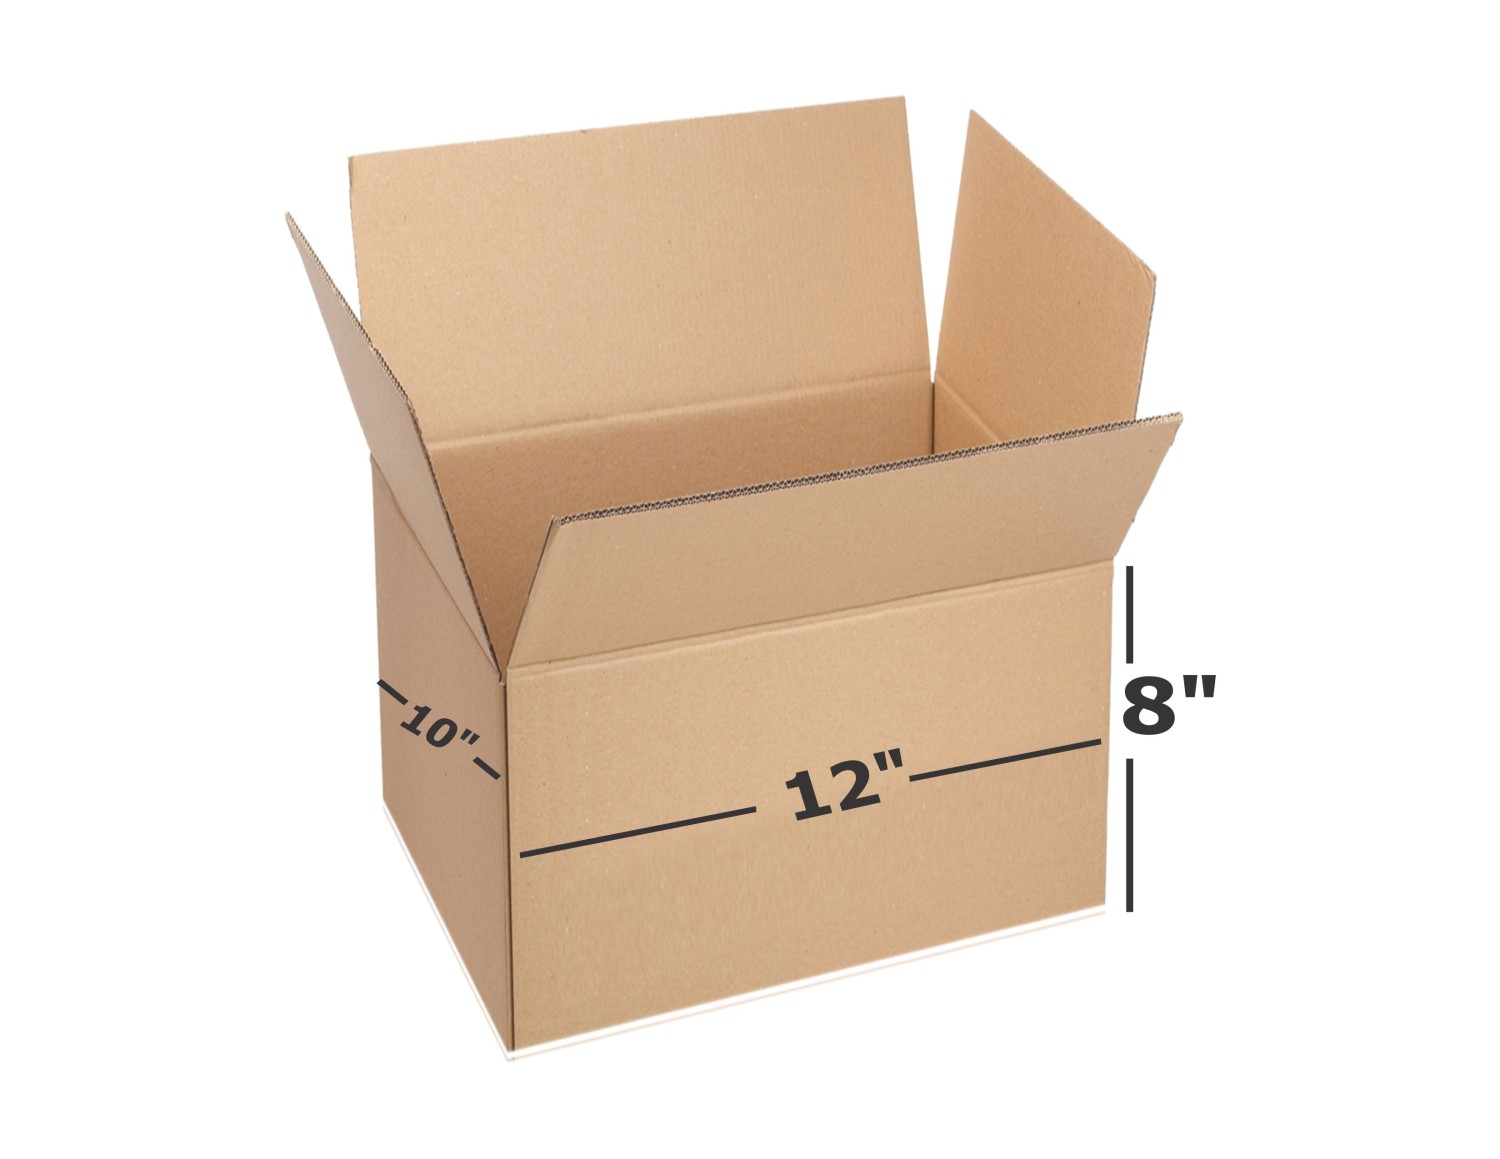 200-10x4x3 White Corrugated Shipping Packing Box Boxes Mailers